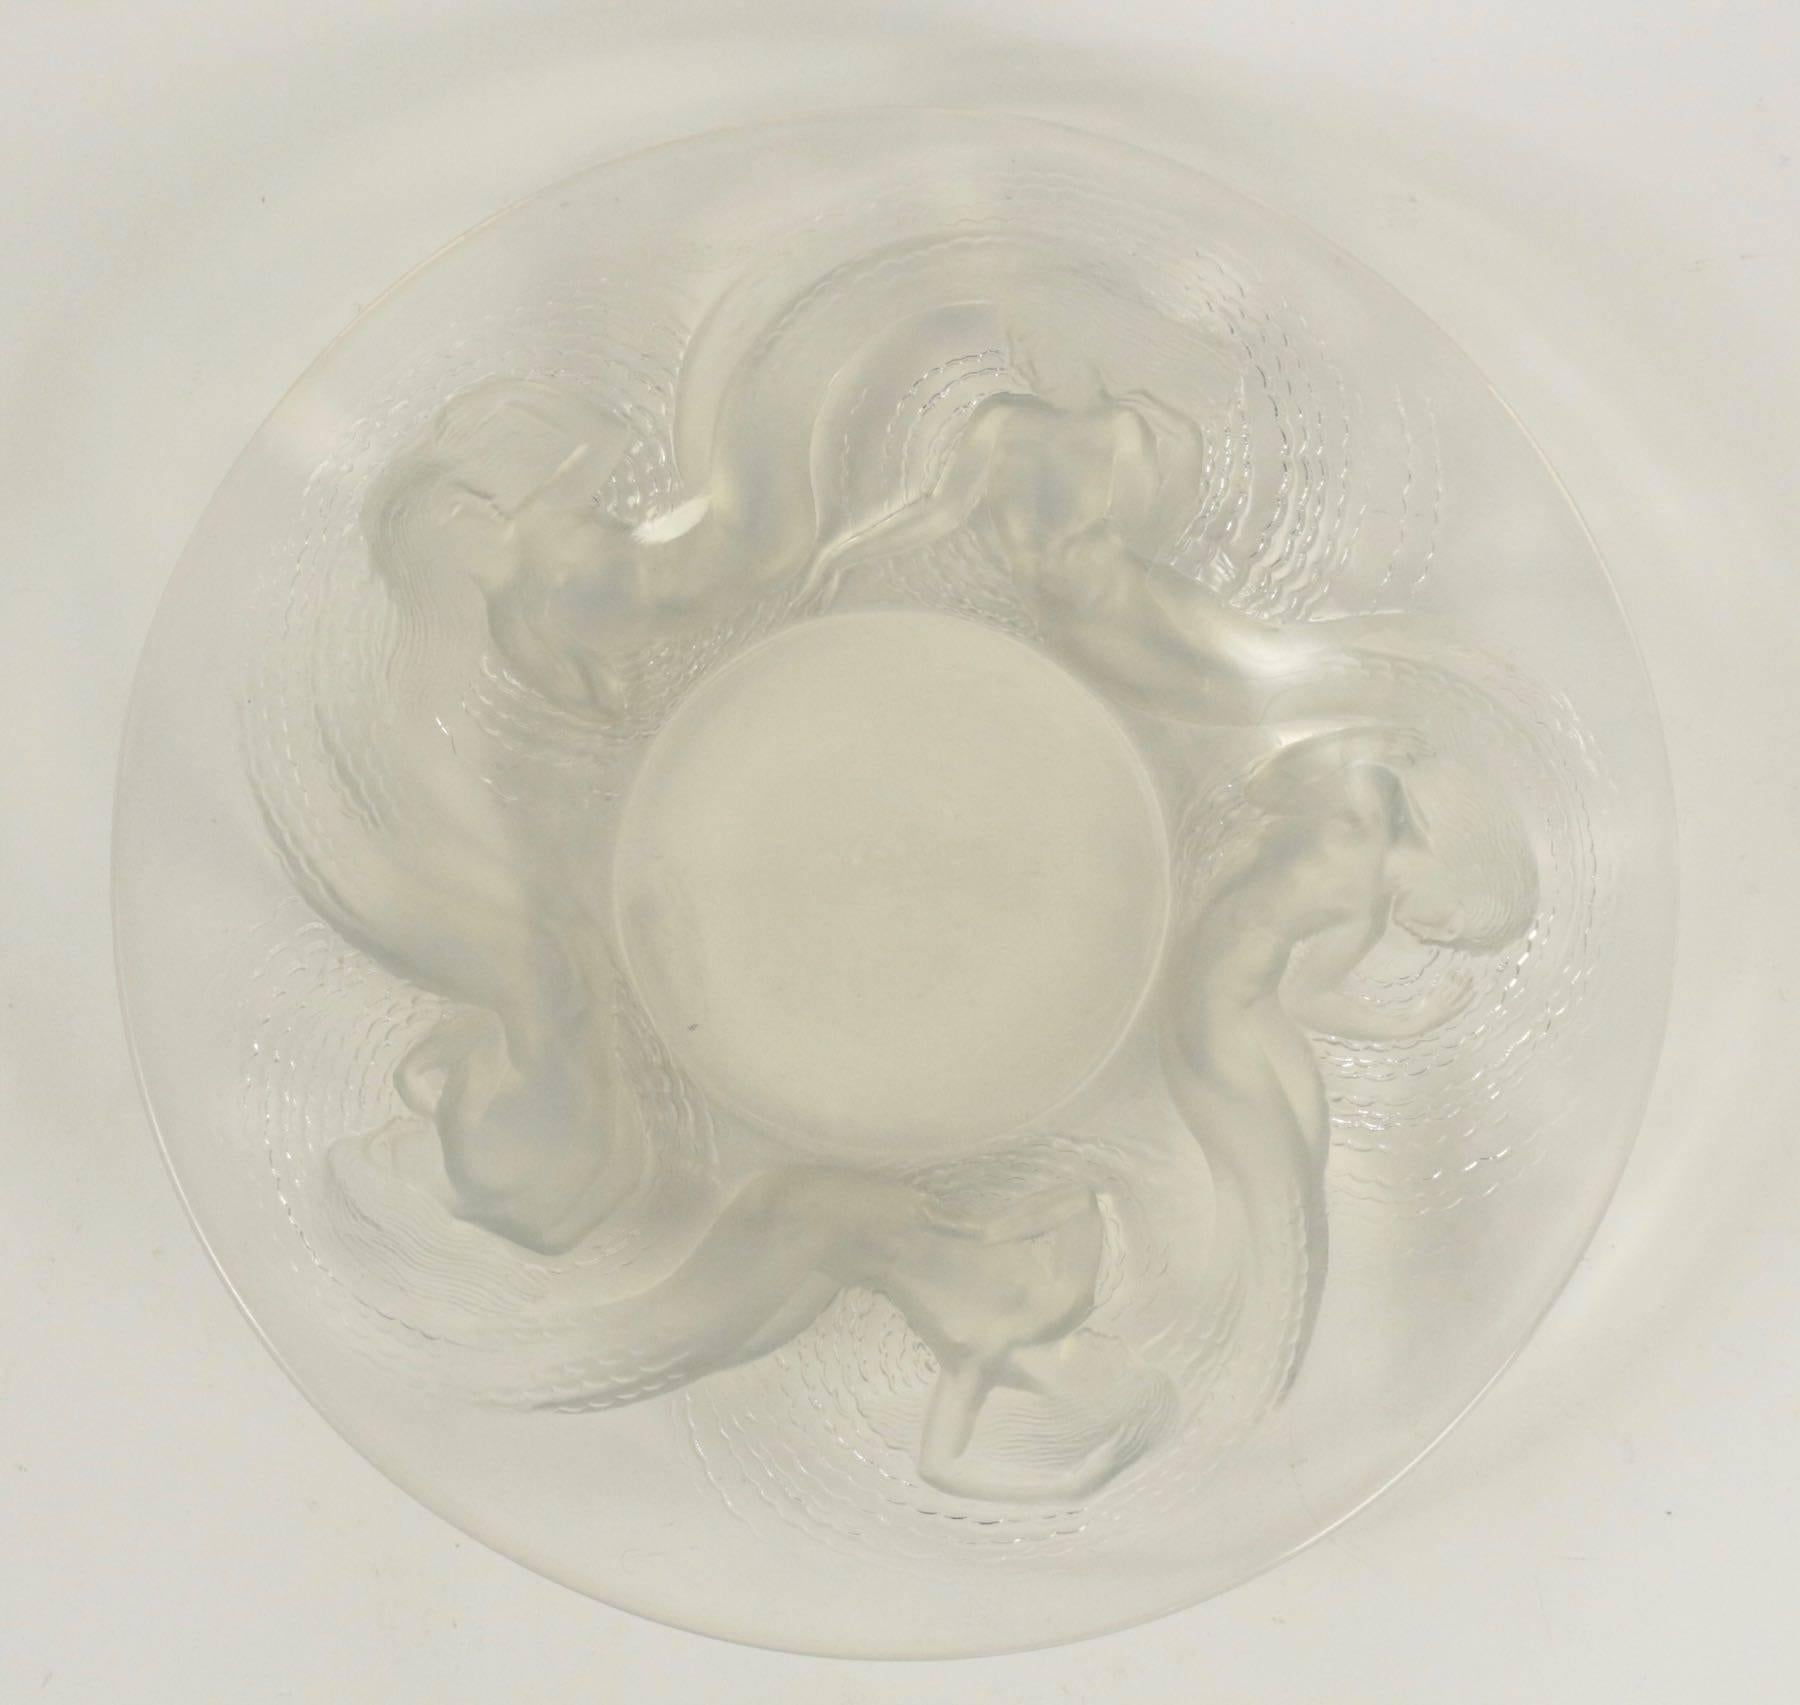 Molded opalescent glass "Calypso" bowl.
Opalescent glass decorated with five mythical female type figures (sea nymph) in various poses on the slightly elevated our part of the bowl surrounding the undecorated center diamètre : 38.5